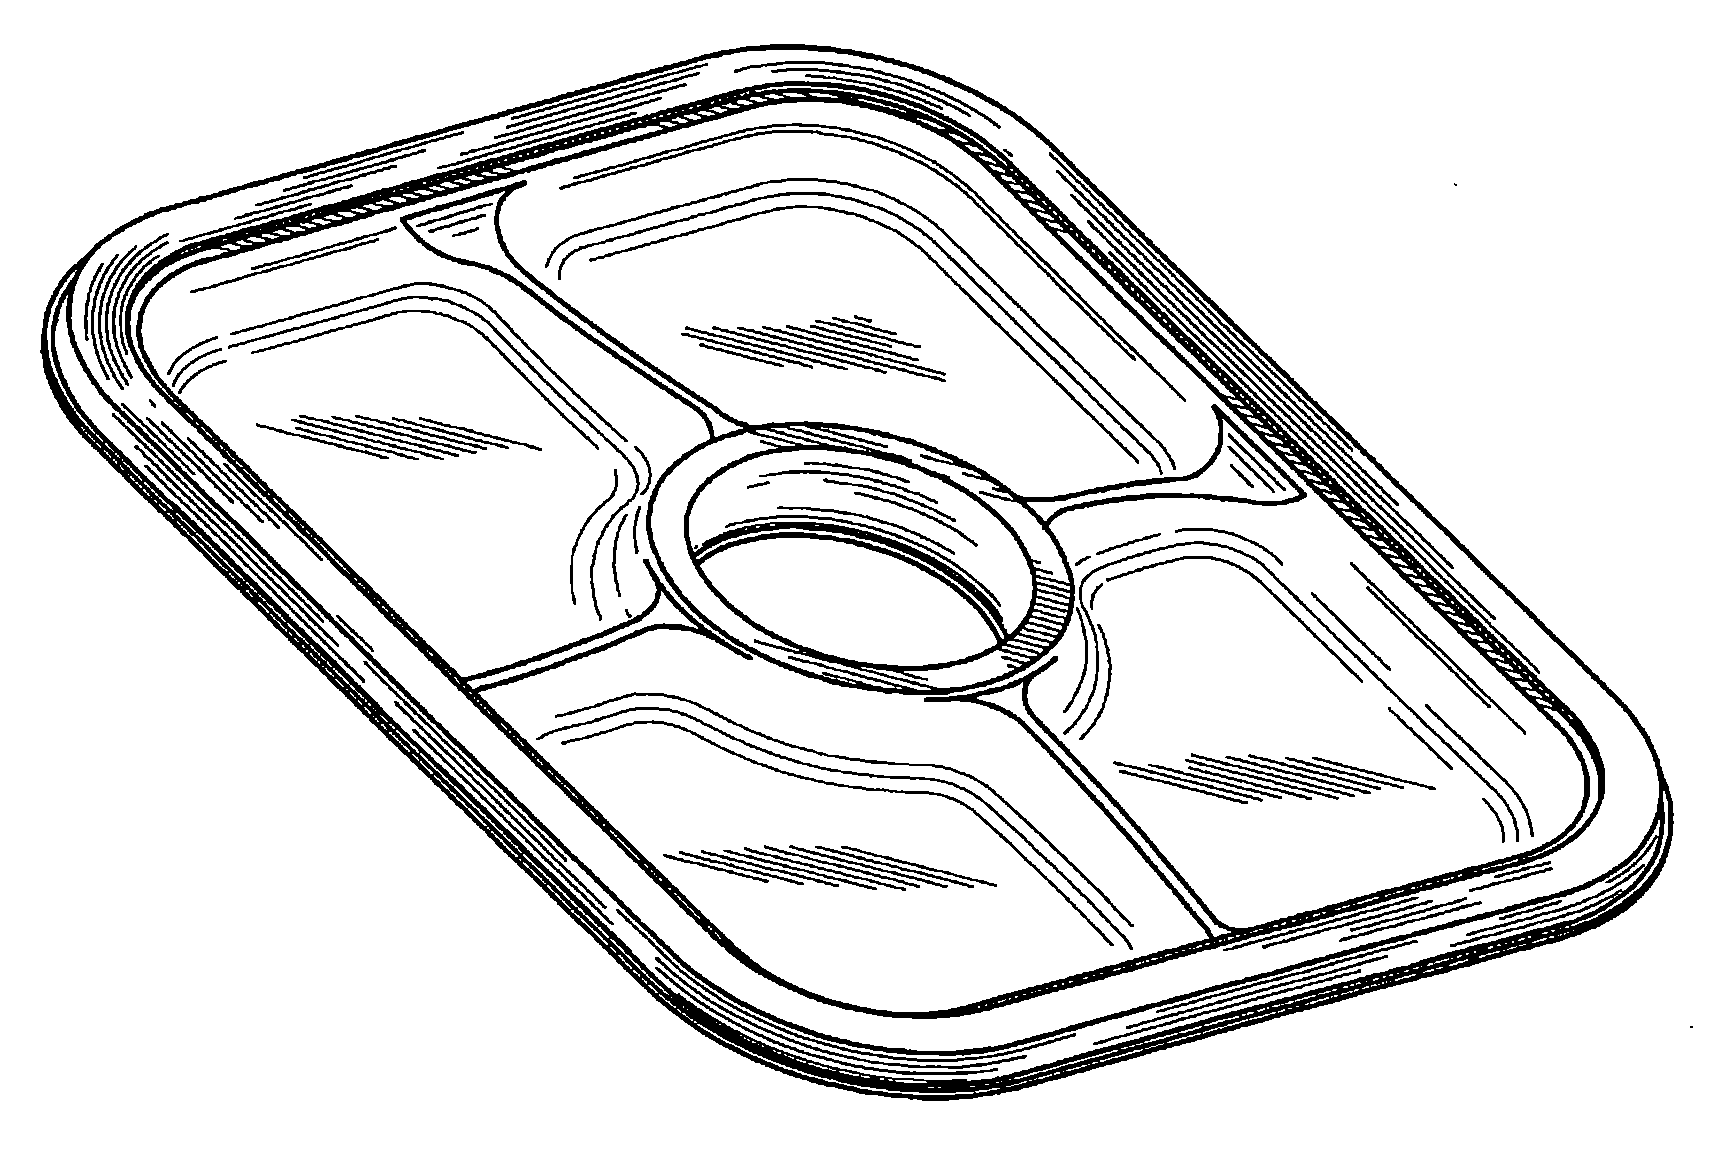 Example of a design for a compartmented tray with a rectangularperimeter that is symmetrical and shows a circular compartment.
